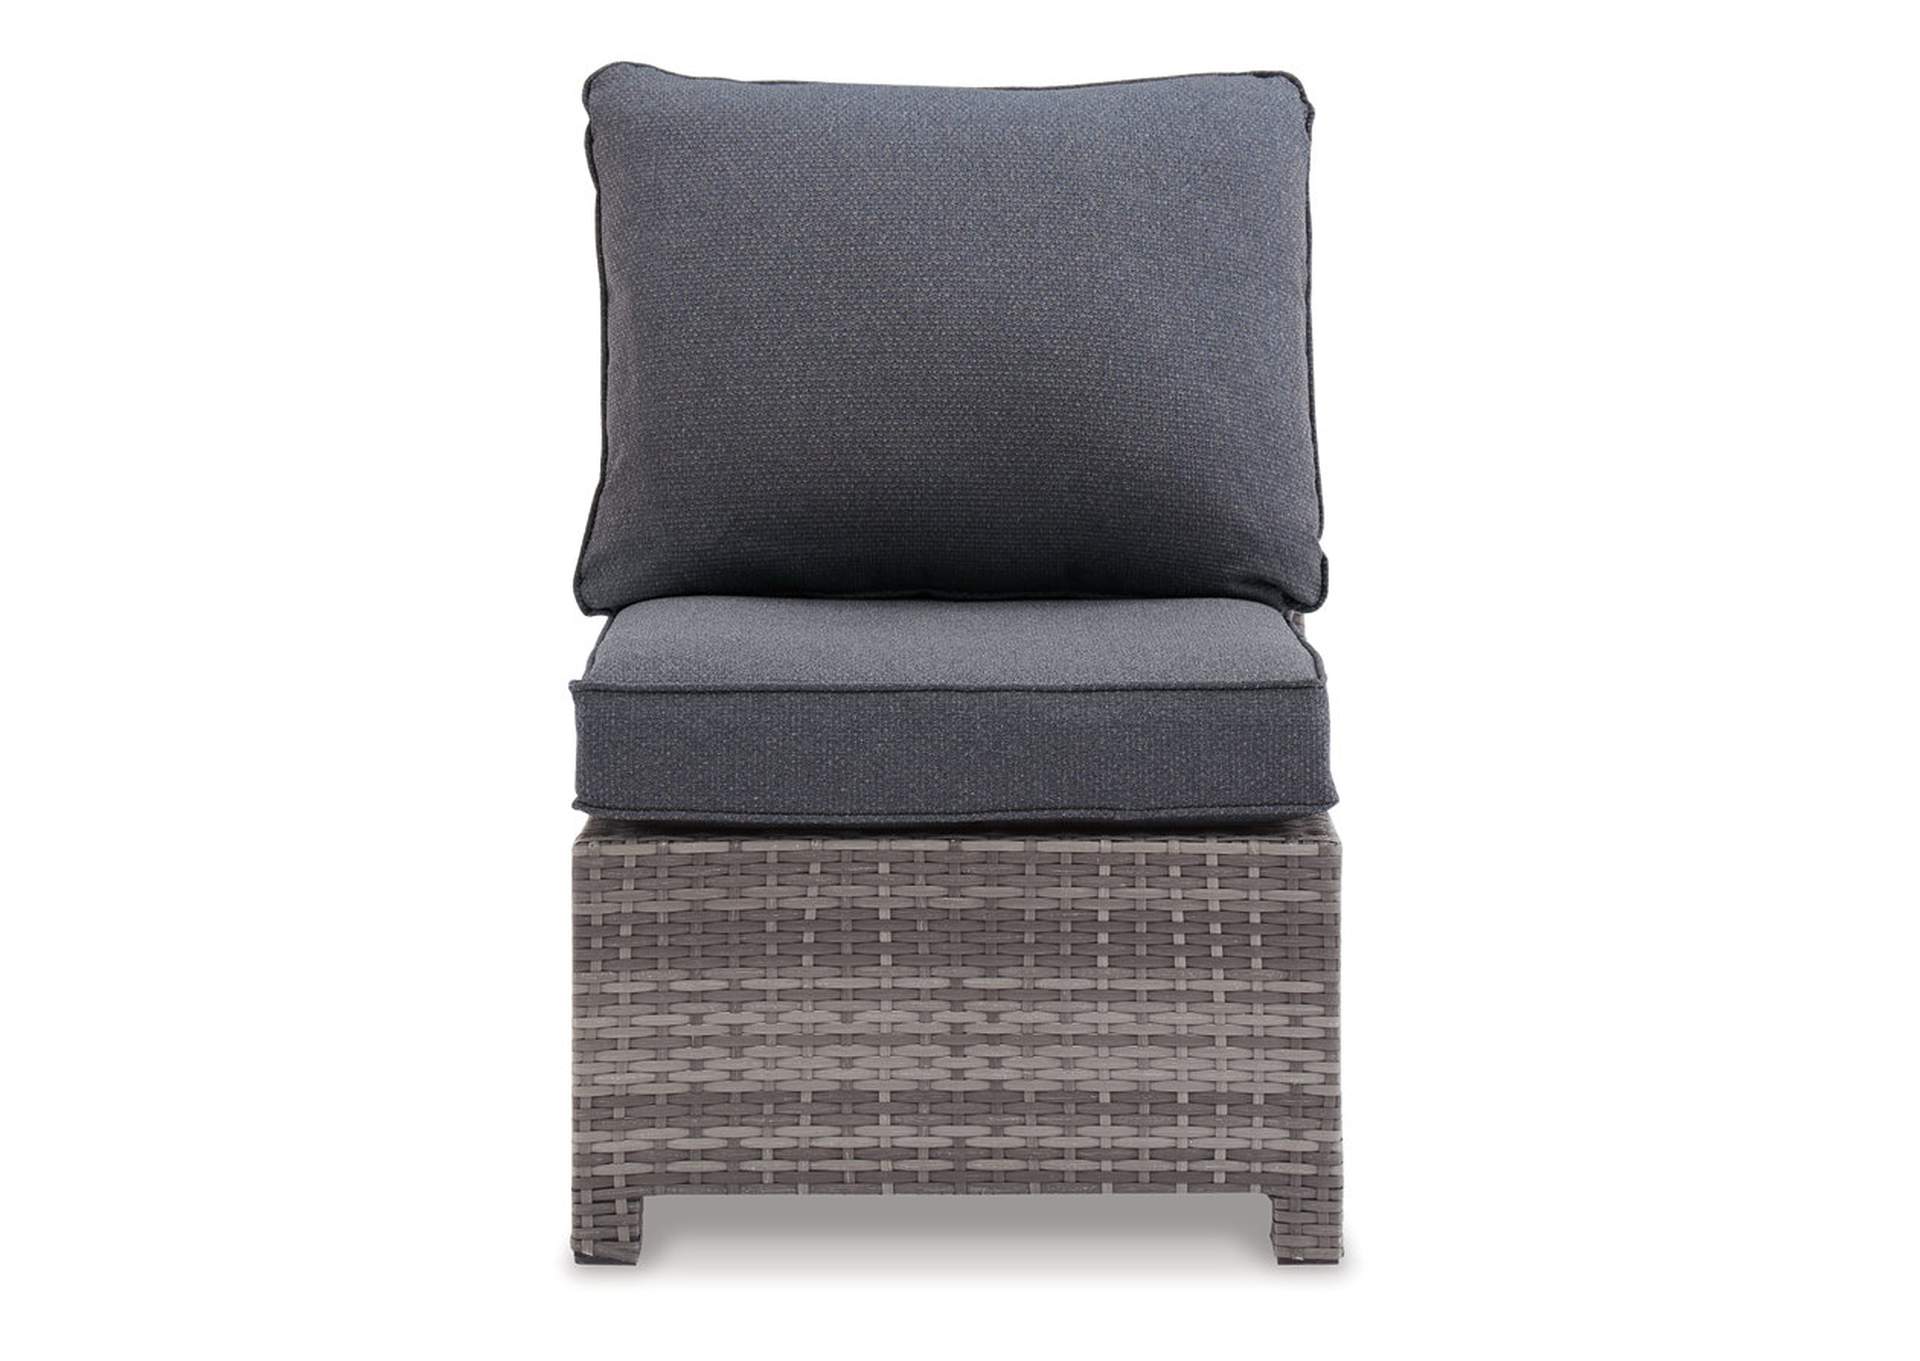 Salem Beach Armless Chair with Cushion,Direct To Consumer Express